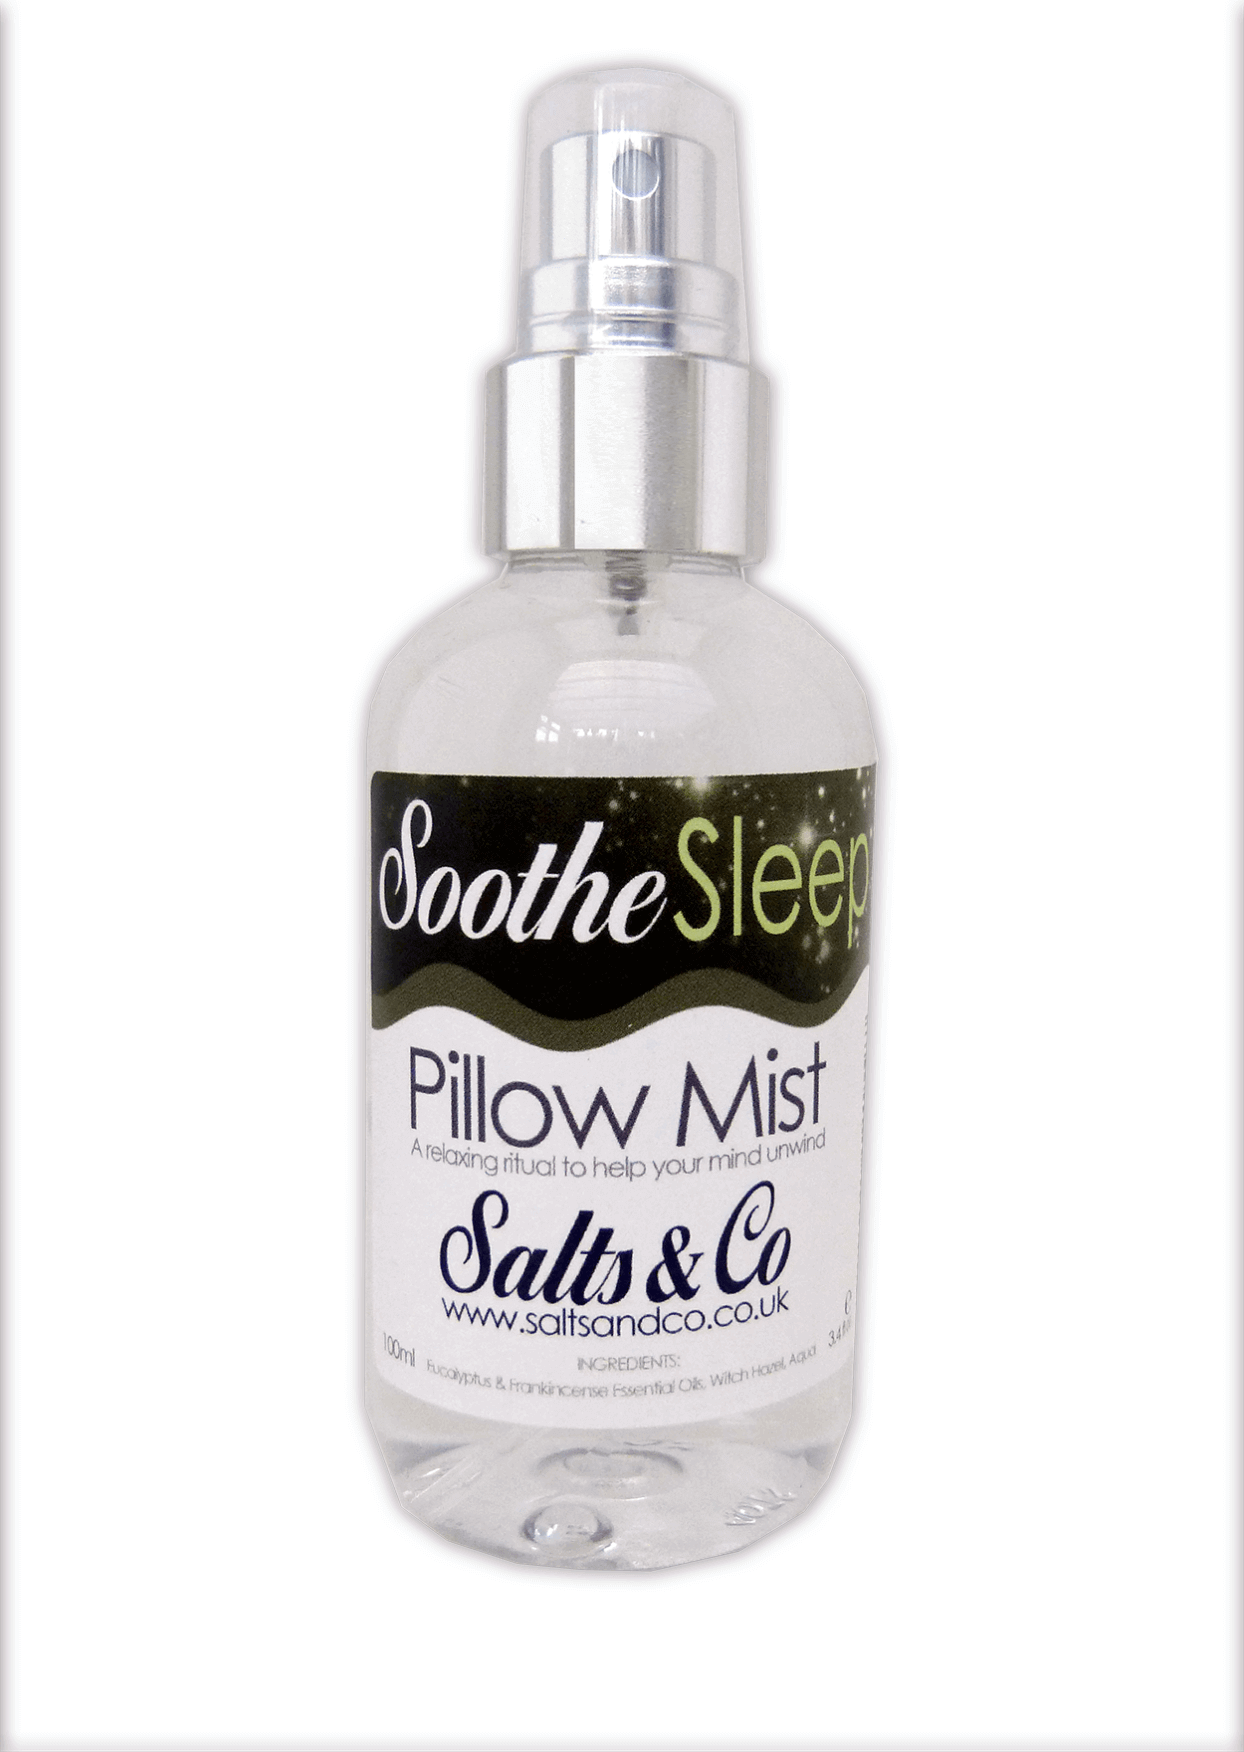 Soothe Pillow Mist by Salts & Co - Eucalyptus & Frankincense essential oils